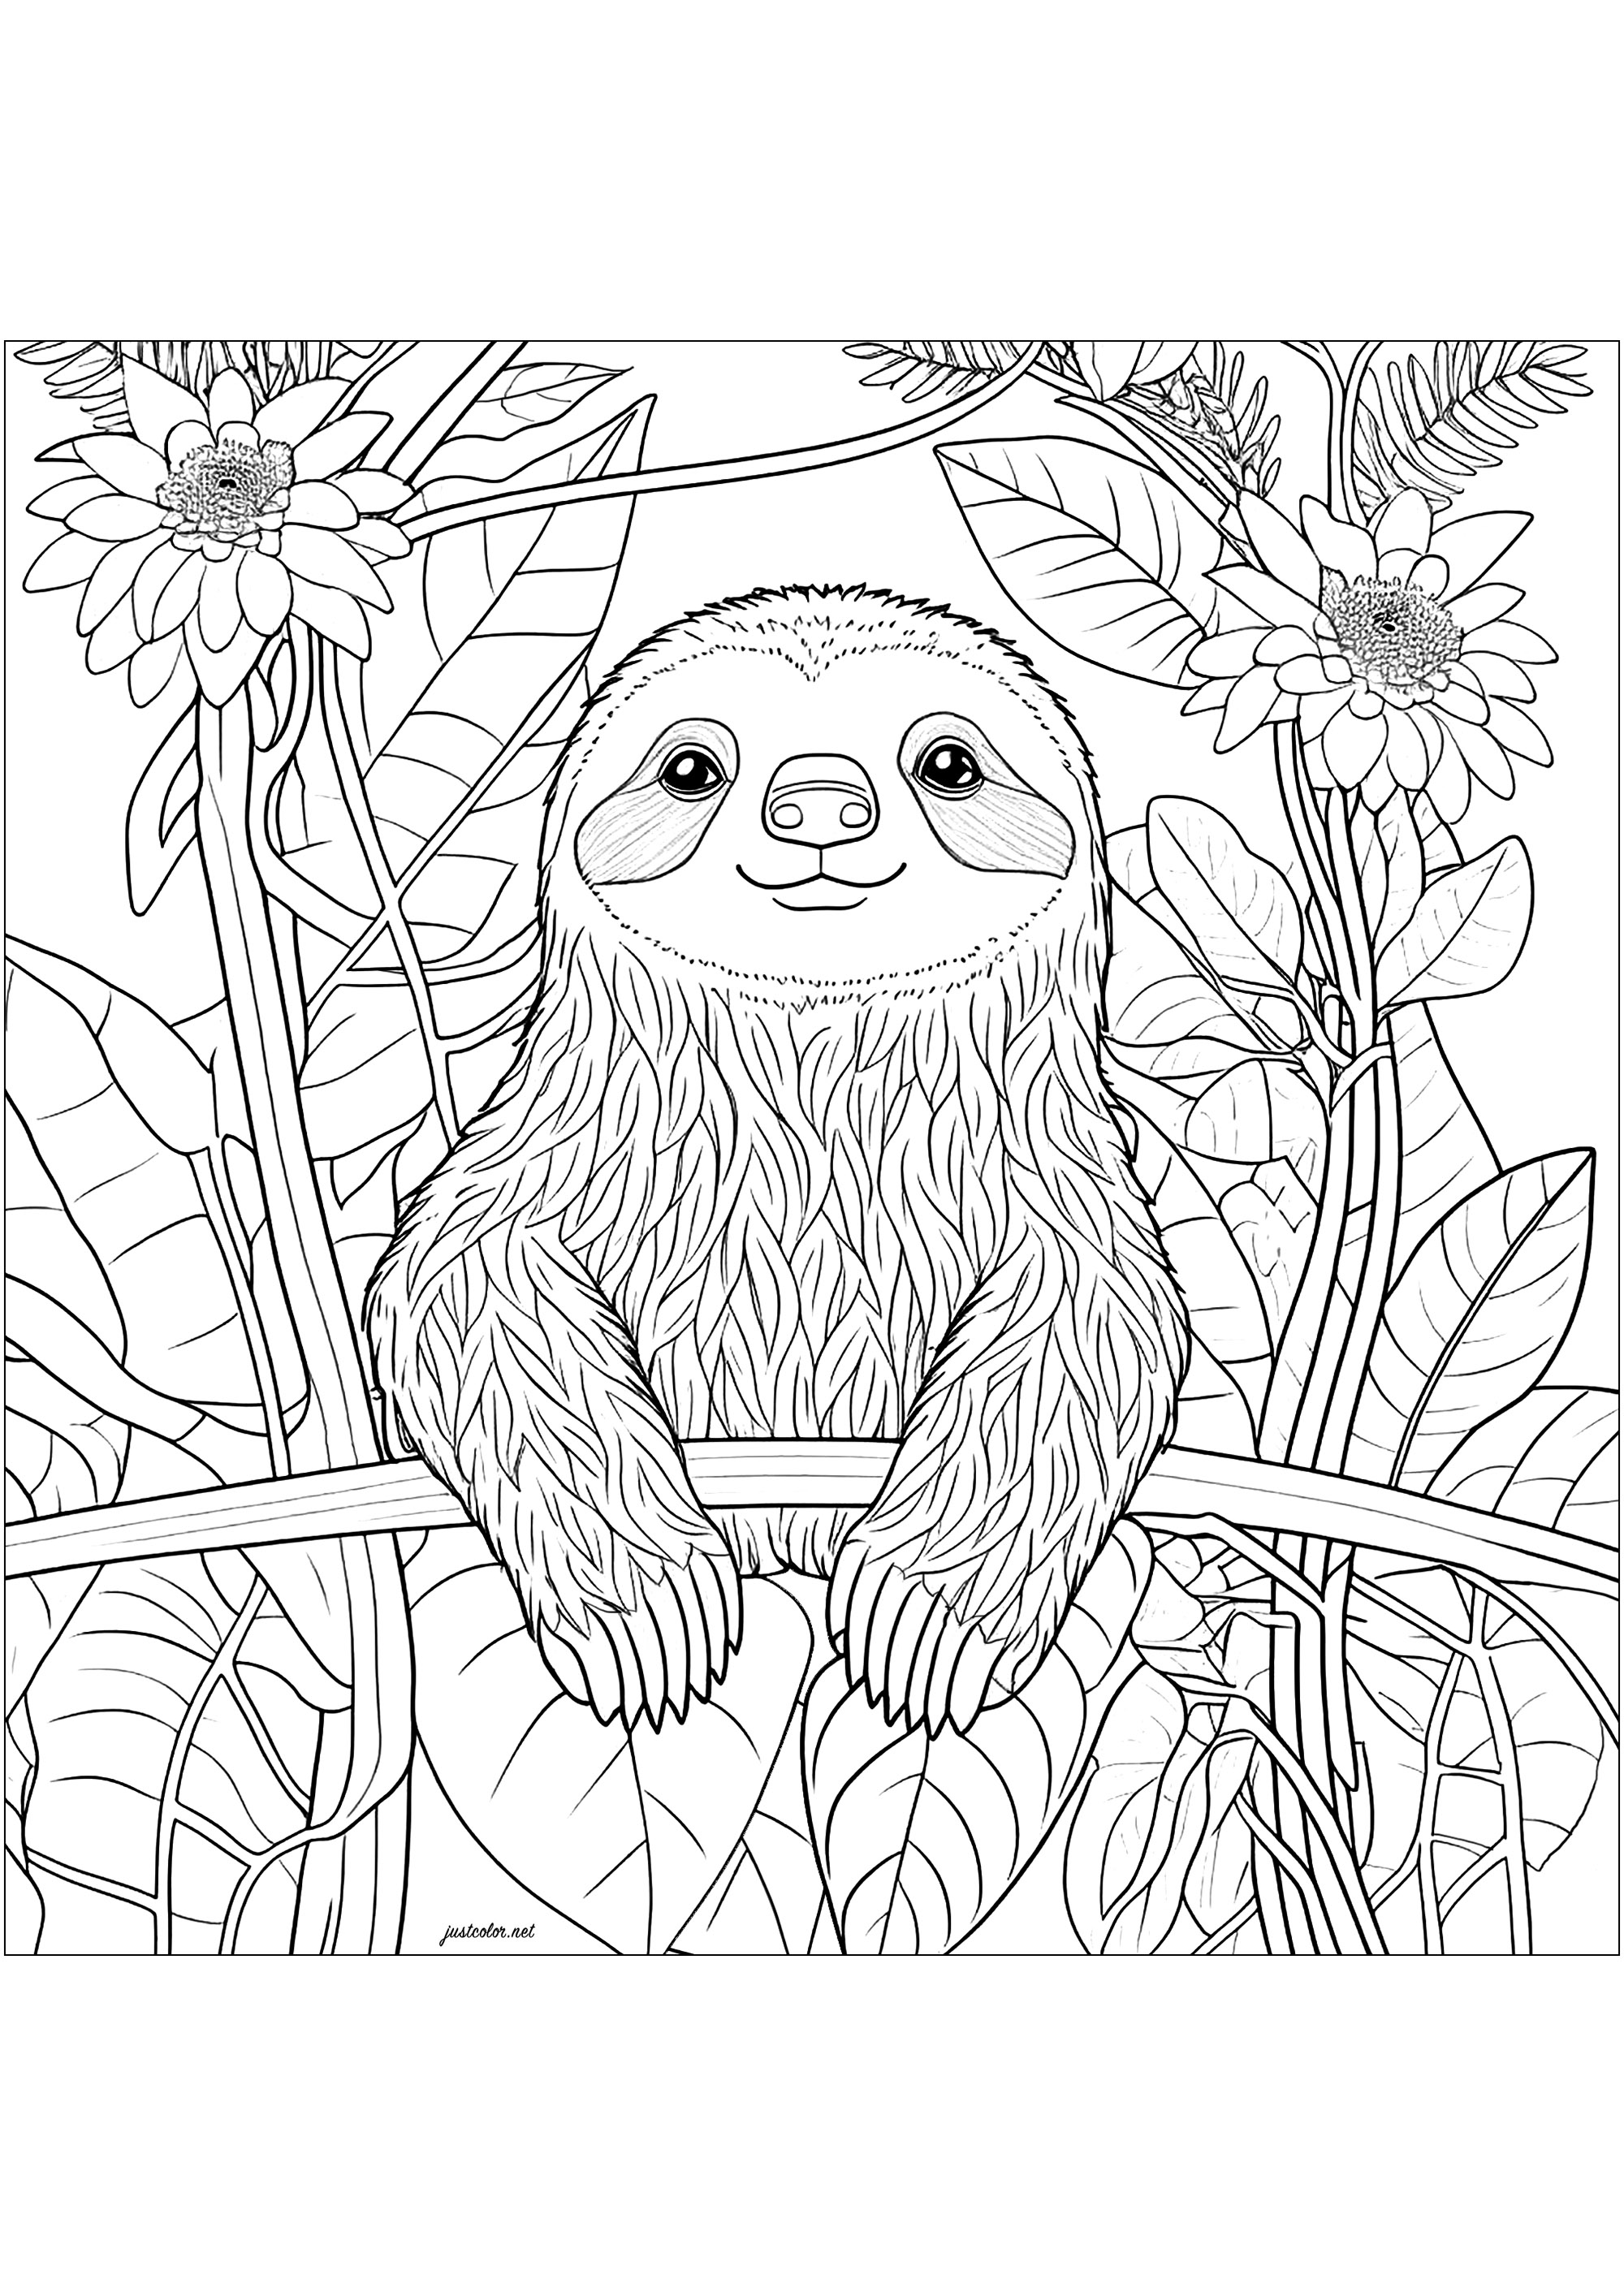 Coloring a Sloth. Sloths are tree-dwelling mammals from South and Central America with an original way of life: they hang upside down in trees almost all the time, moving slowly.